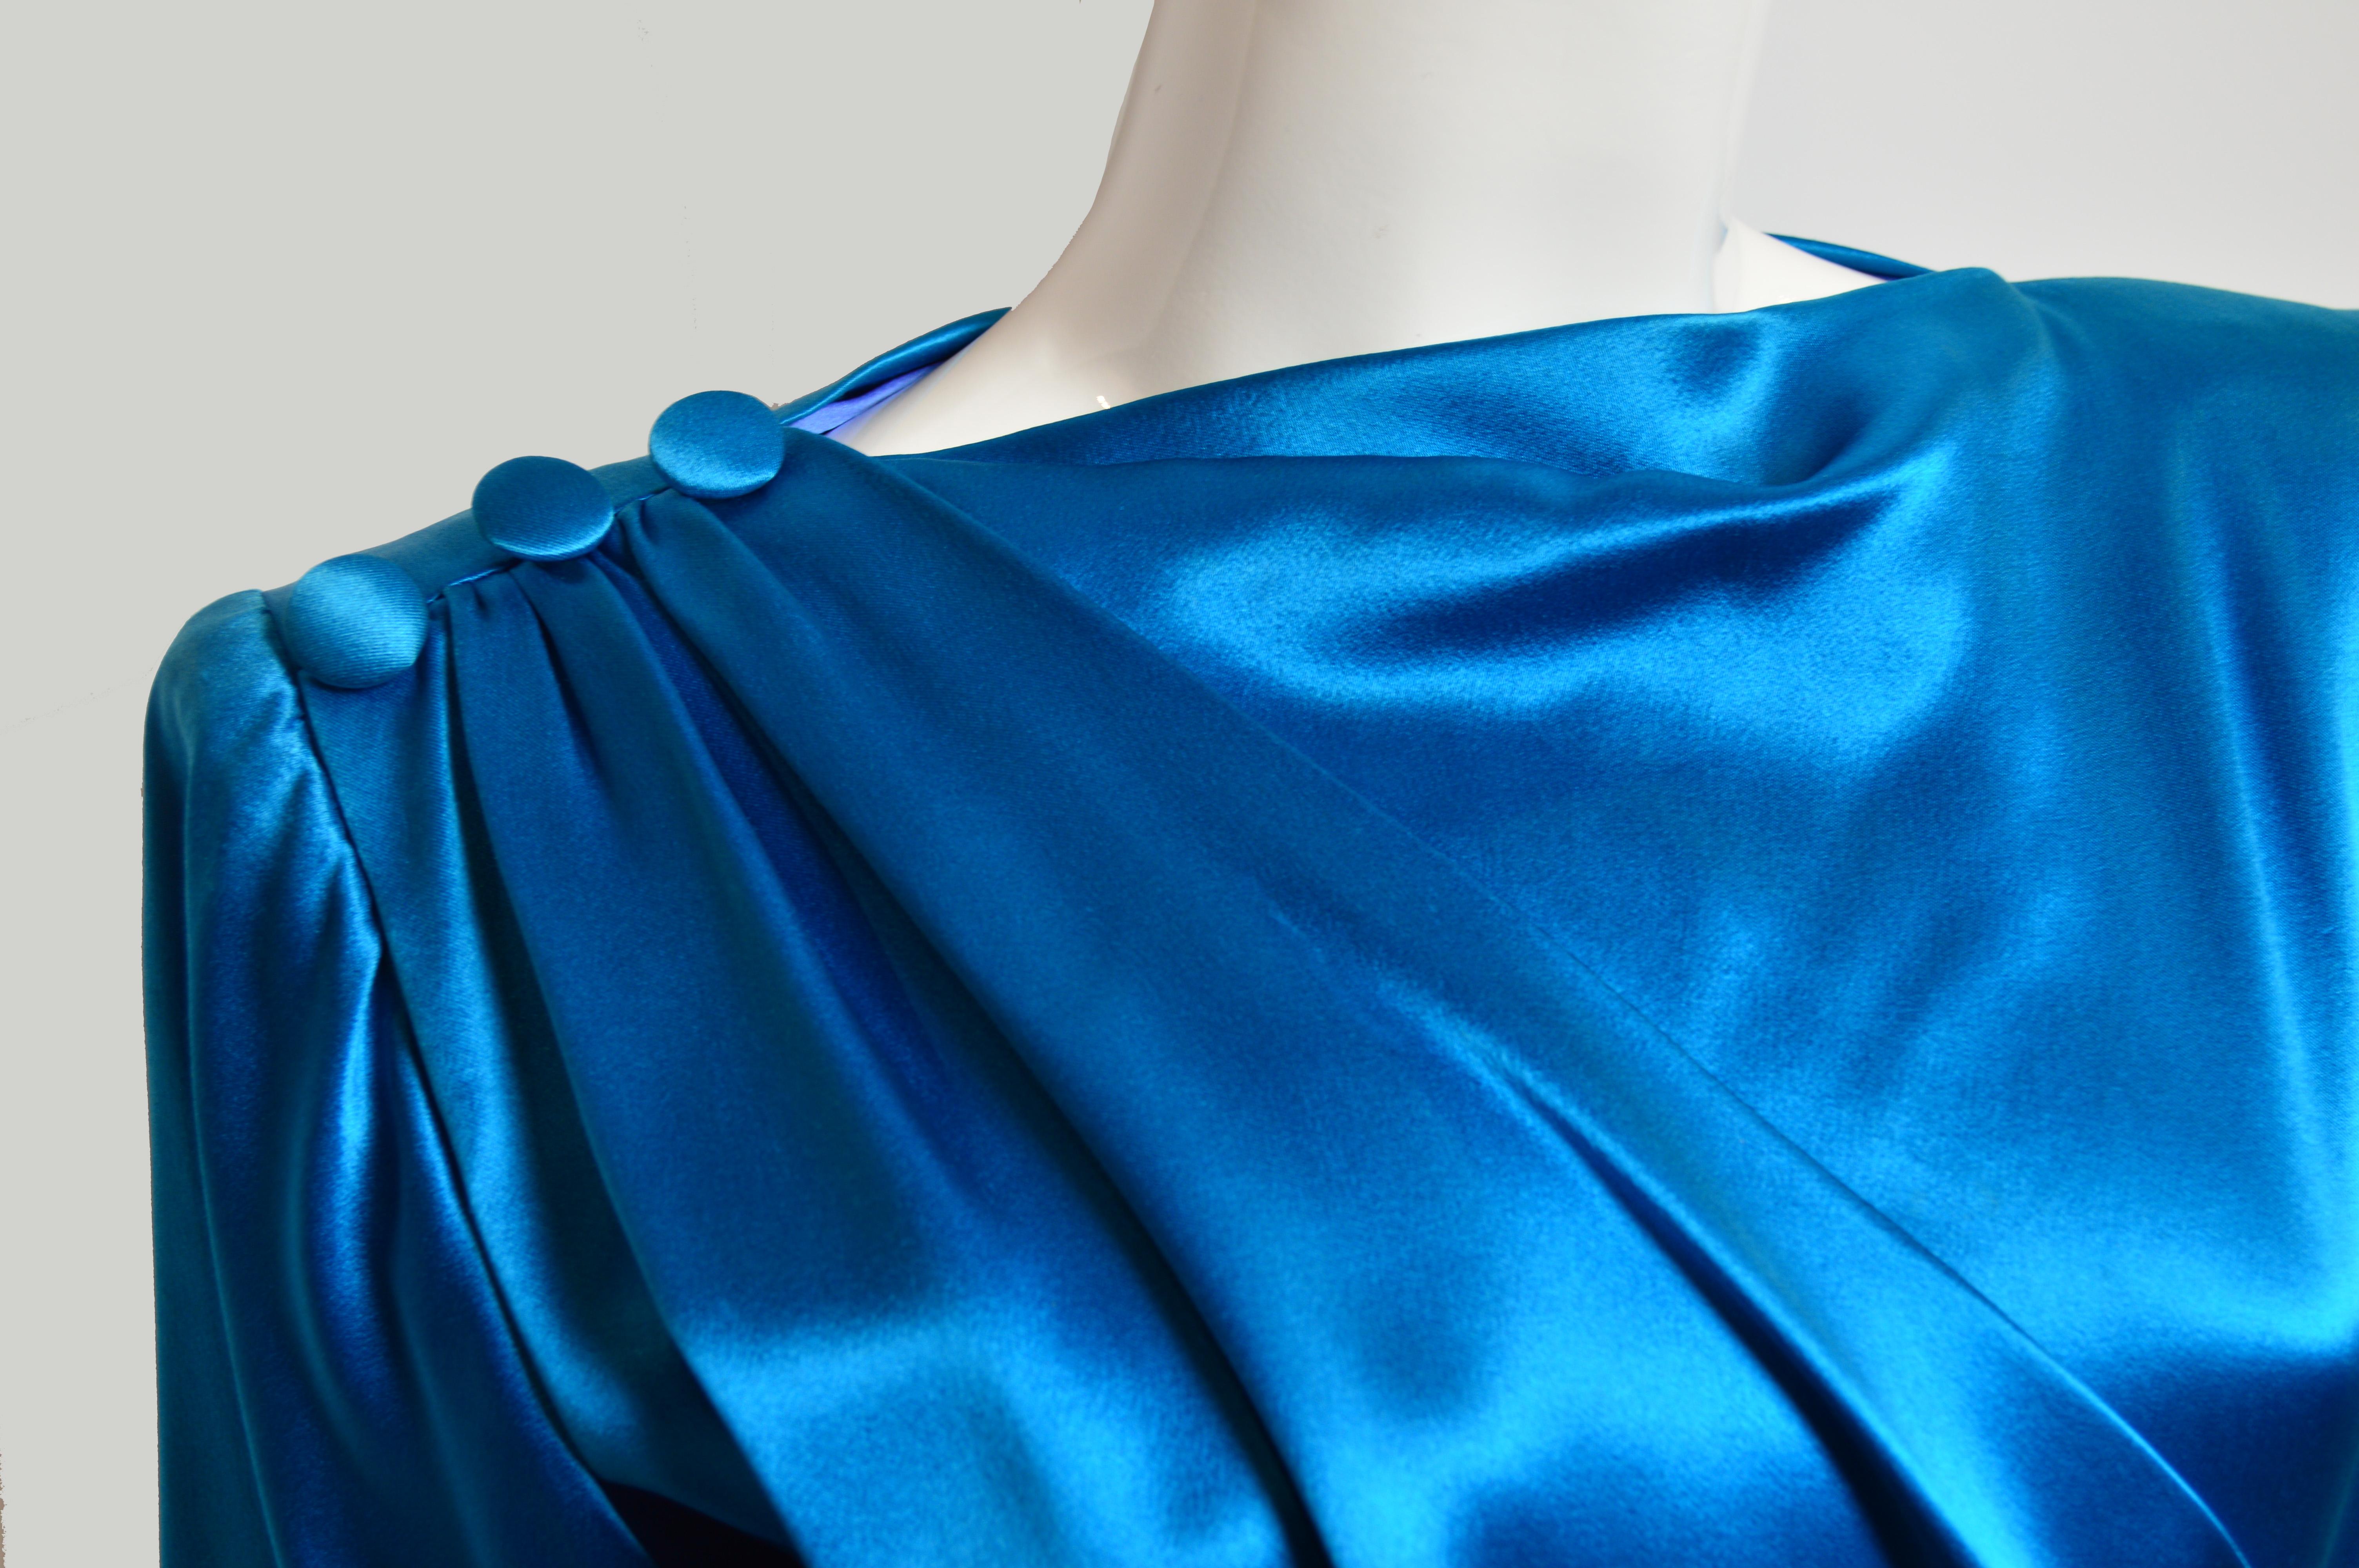 Vintage Yves Saint Laurent Haute Couture electric blue documented dress, 1987 In Good Condition For Sale In New York, NY